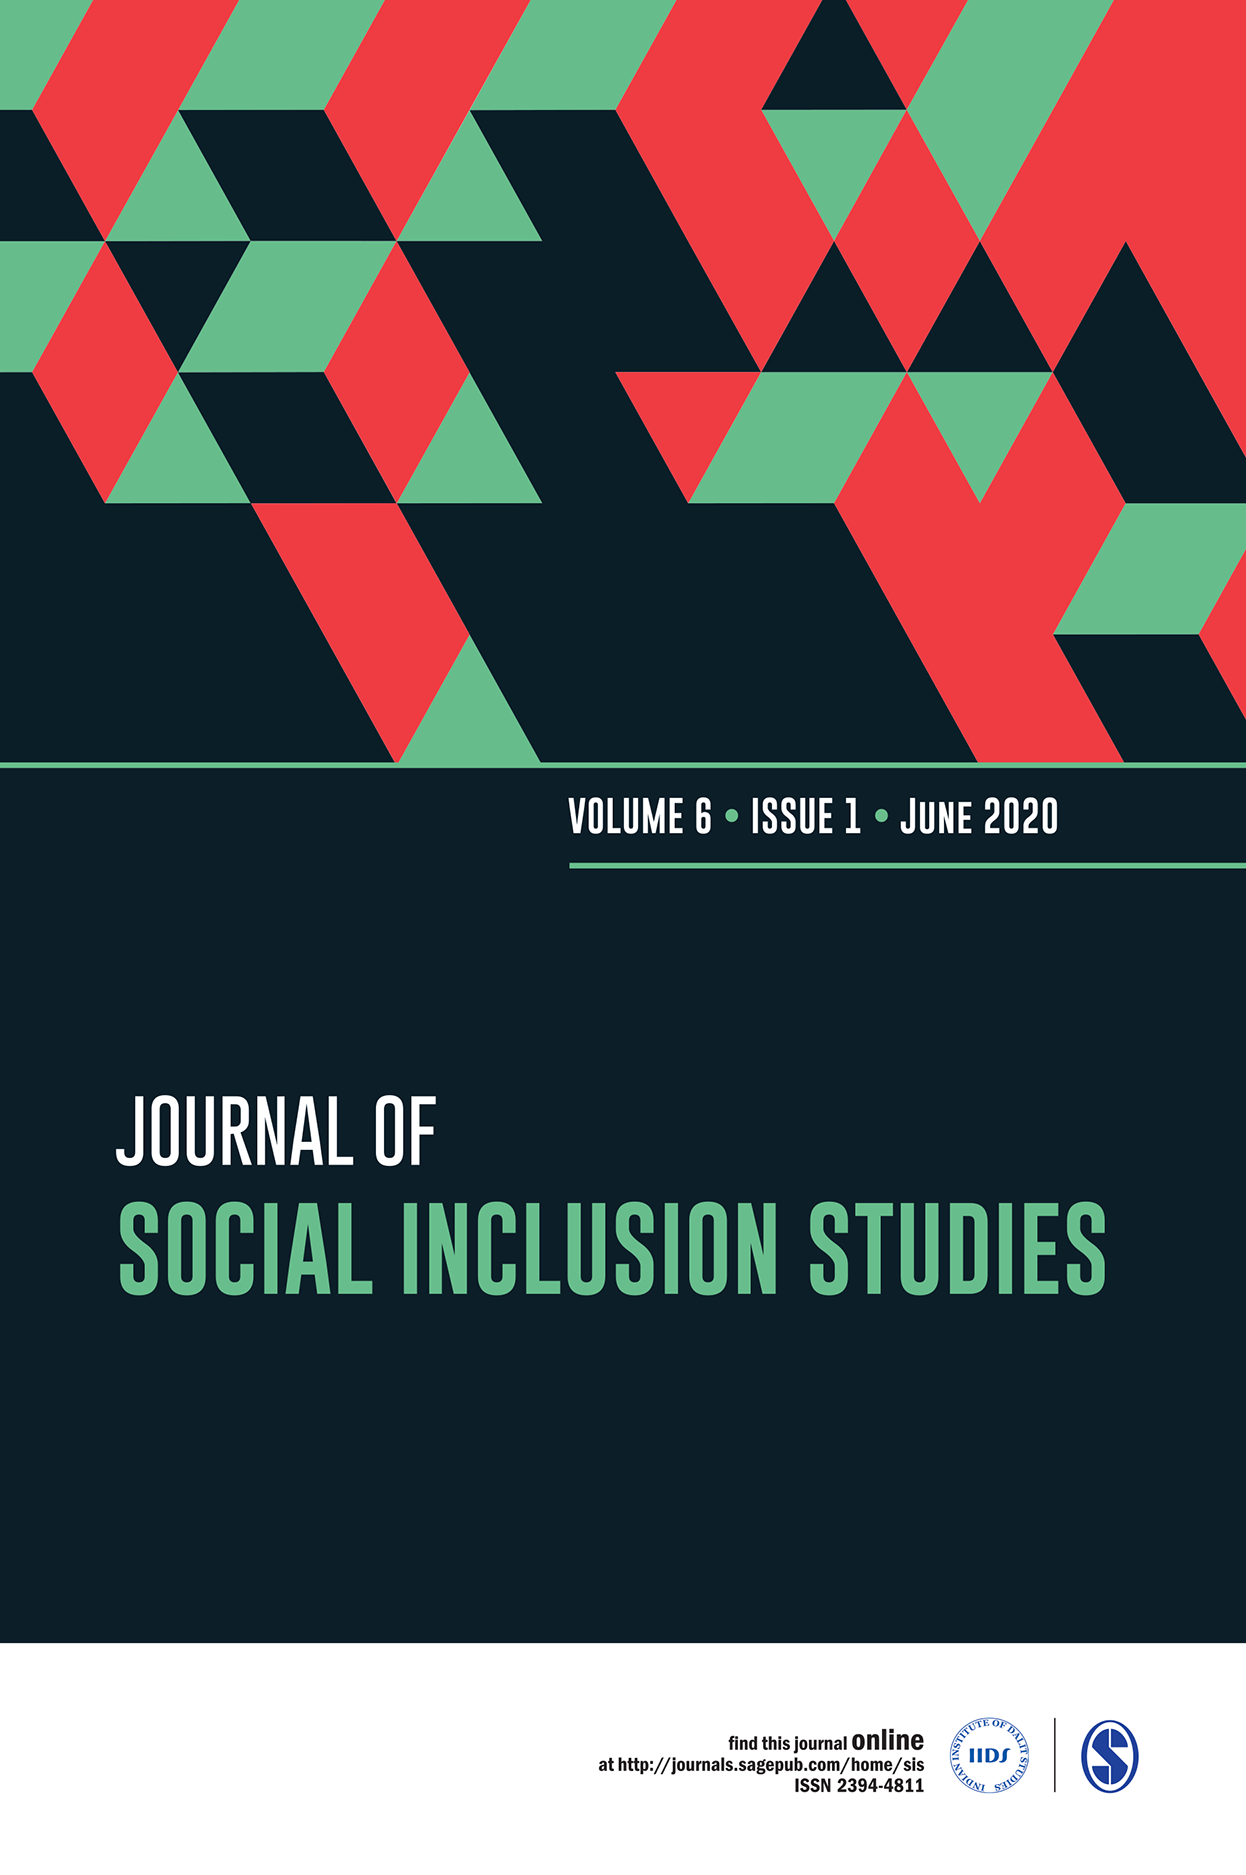 Journal of Social Inclusion Studies